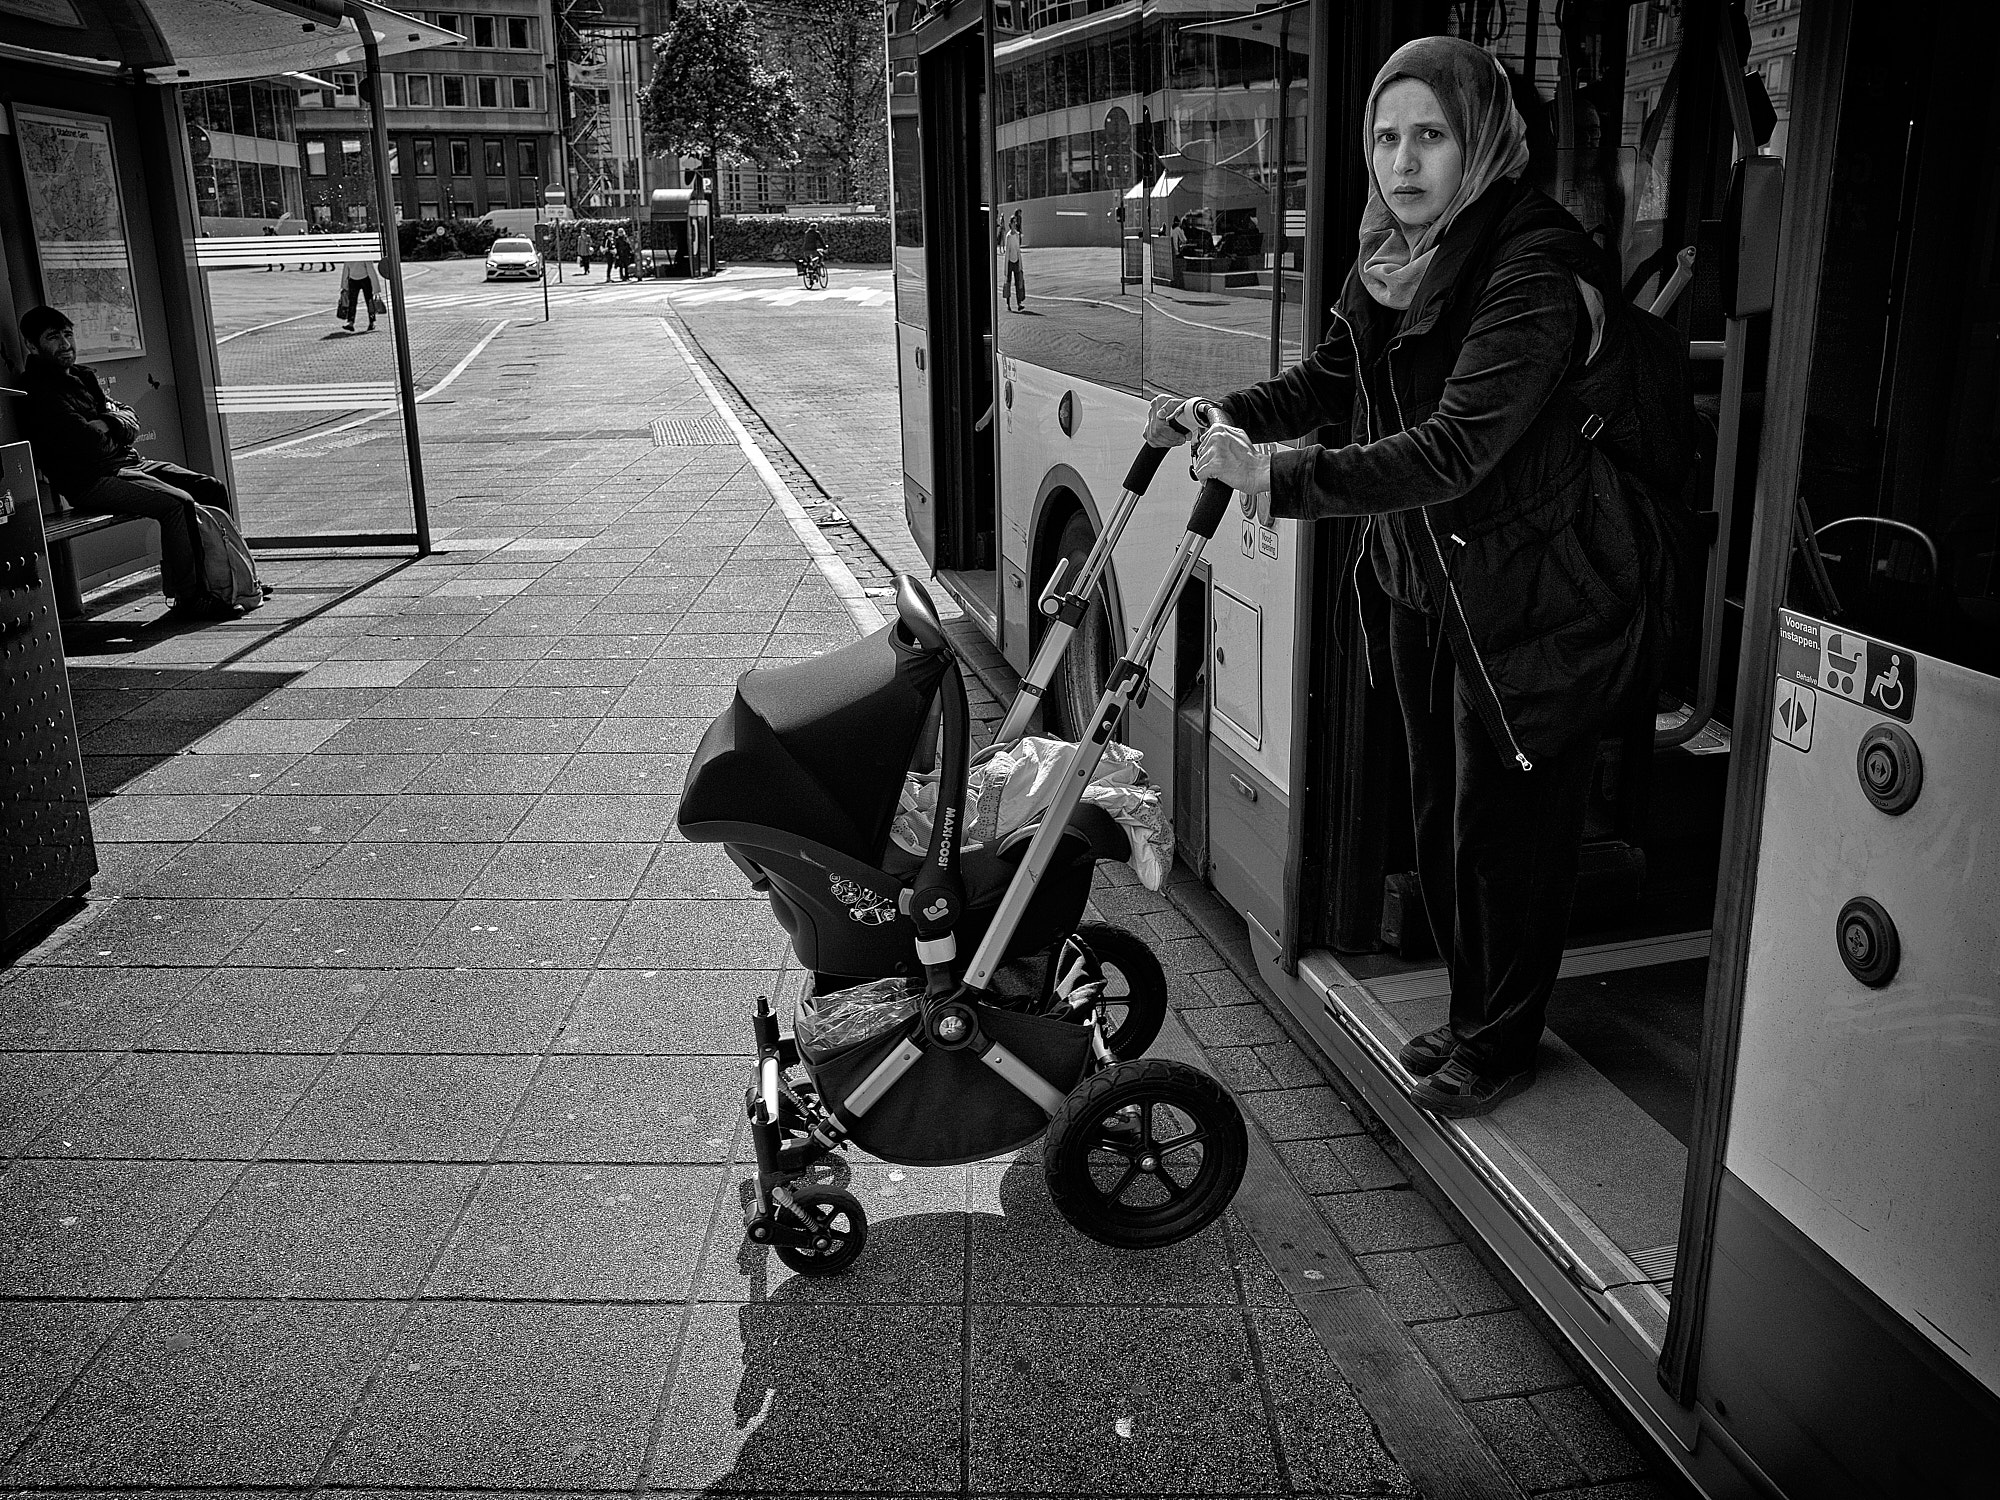 65 Young mother wearing a hijab